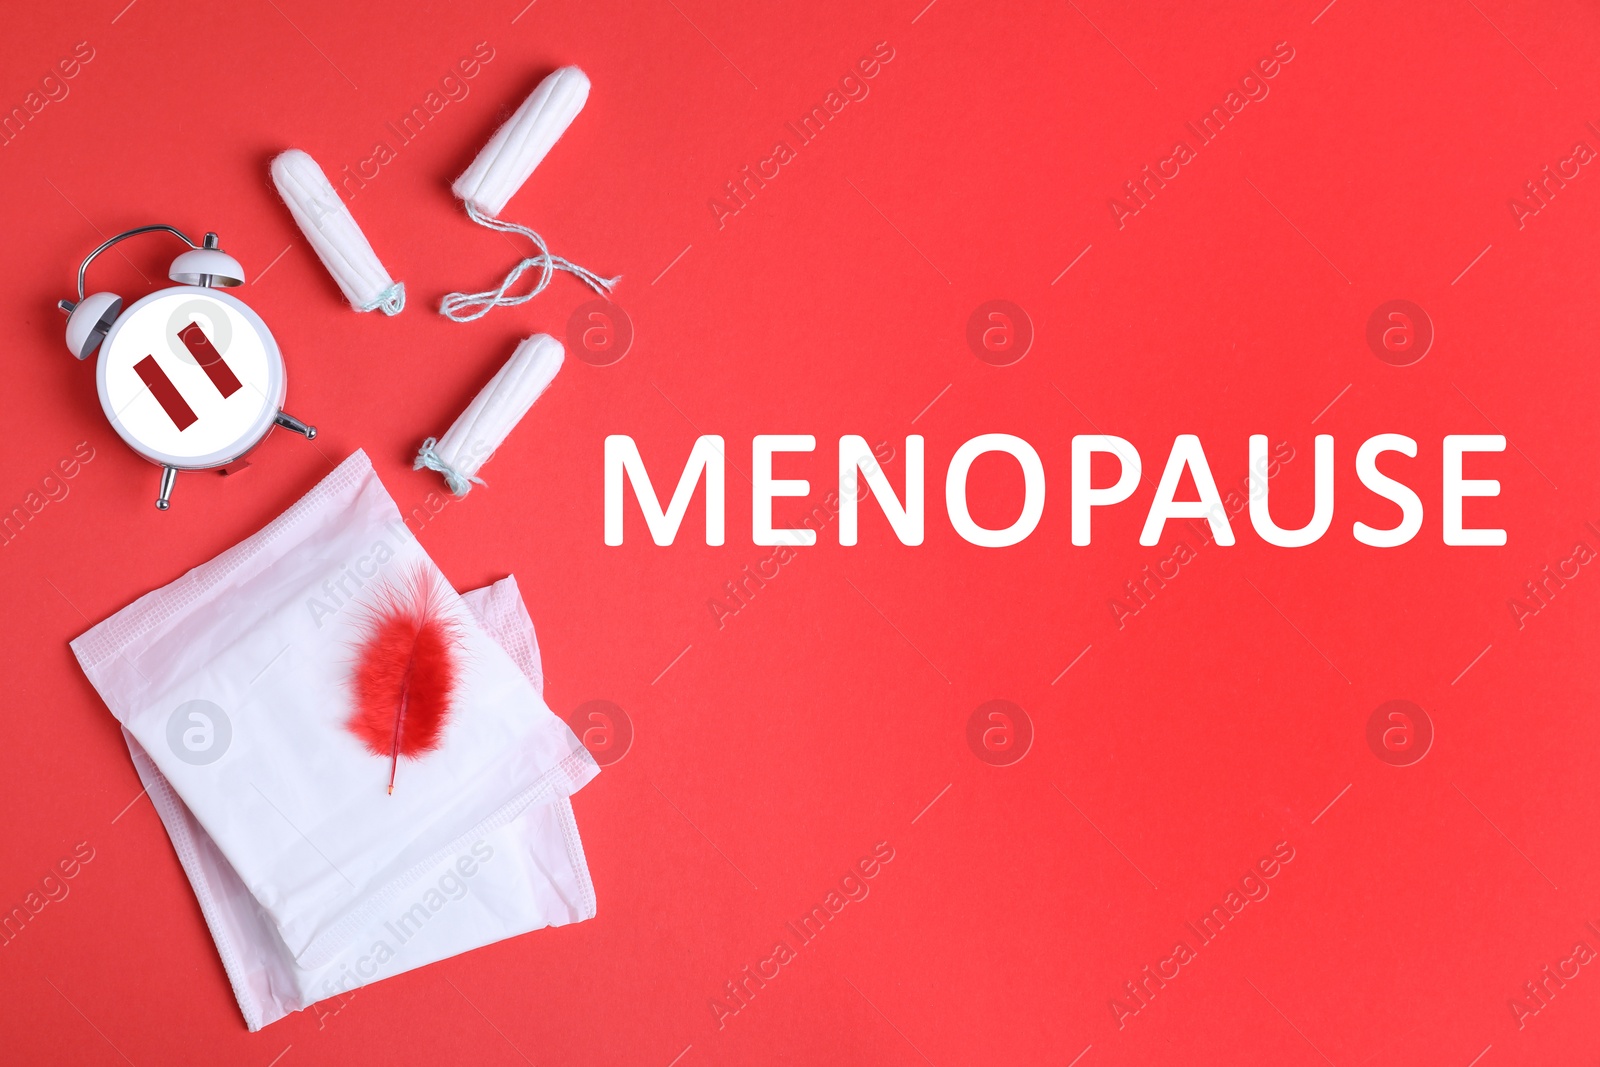 Image of Menopause word, alarm clock with pause symbol, tampons and pads on red background, flat lay